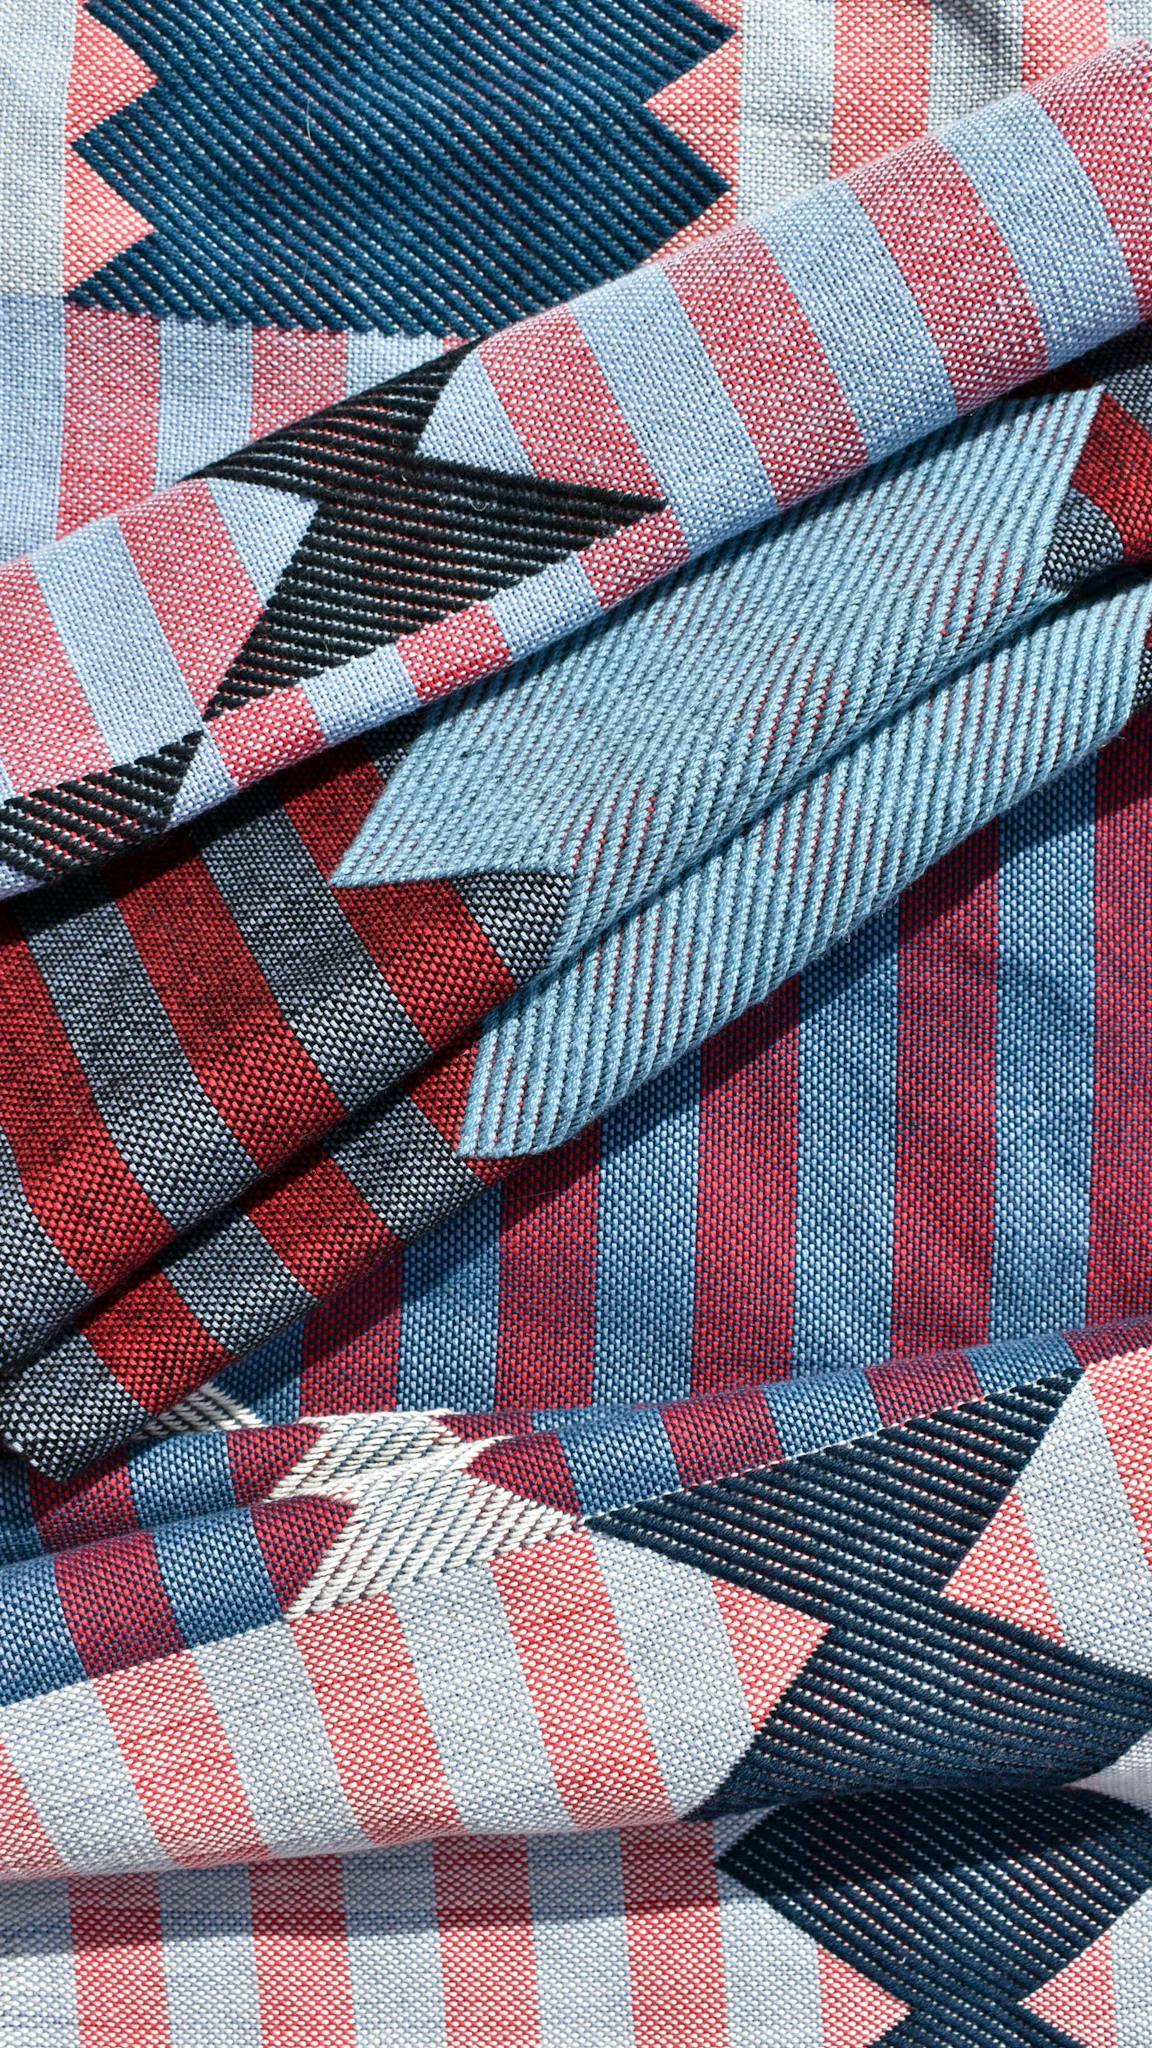 A close-up of a woven blue and pink striped fabric with folds in it by artist Sarah Sullivan Sherrod.